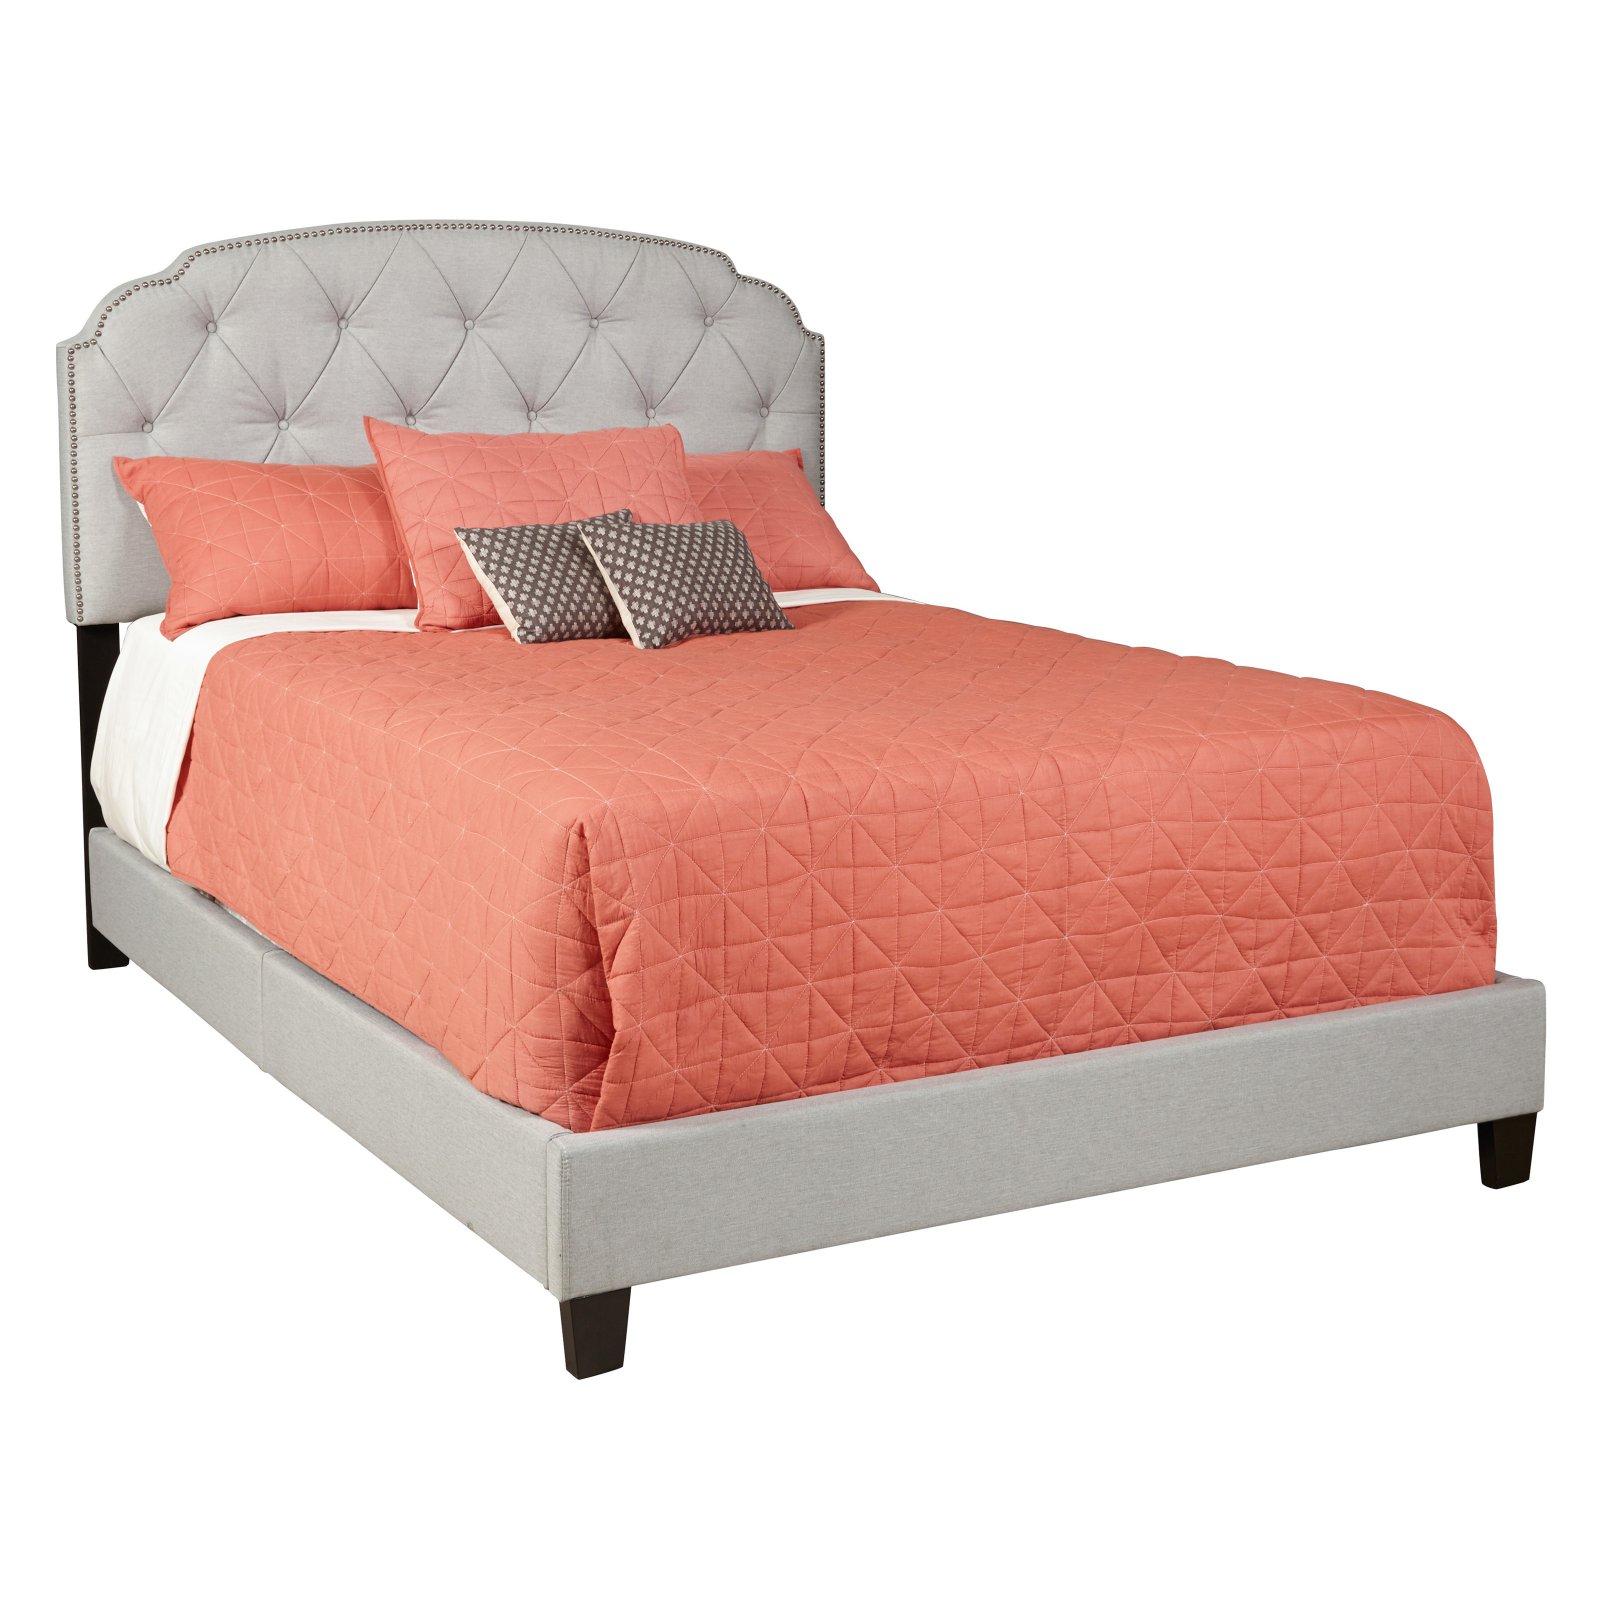 Trespass Marmor Tufted Nail Head Upholstered Bed - Queen - image 1 of 4